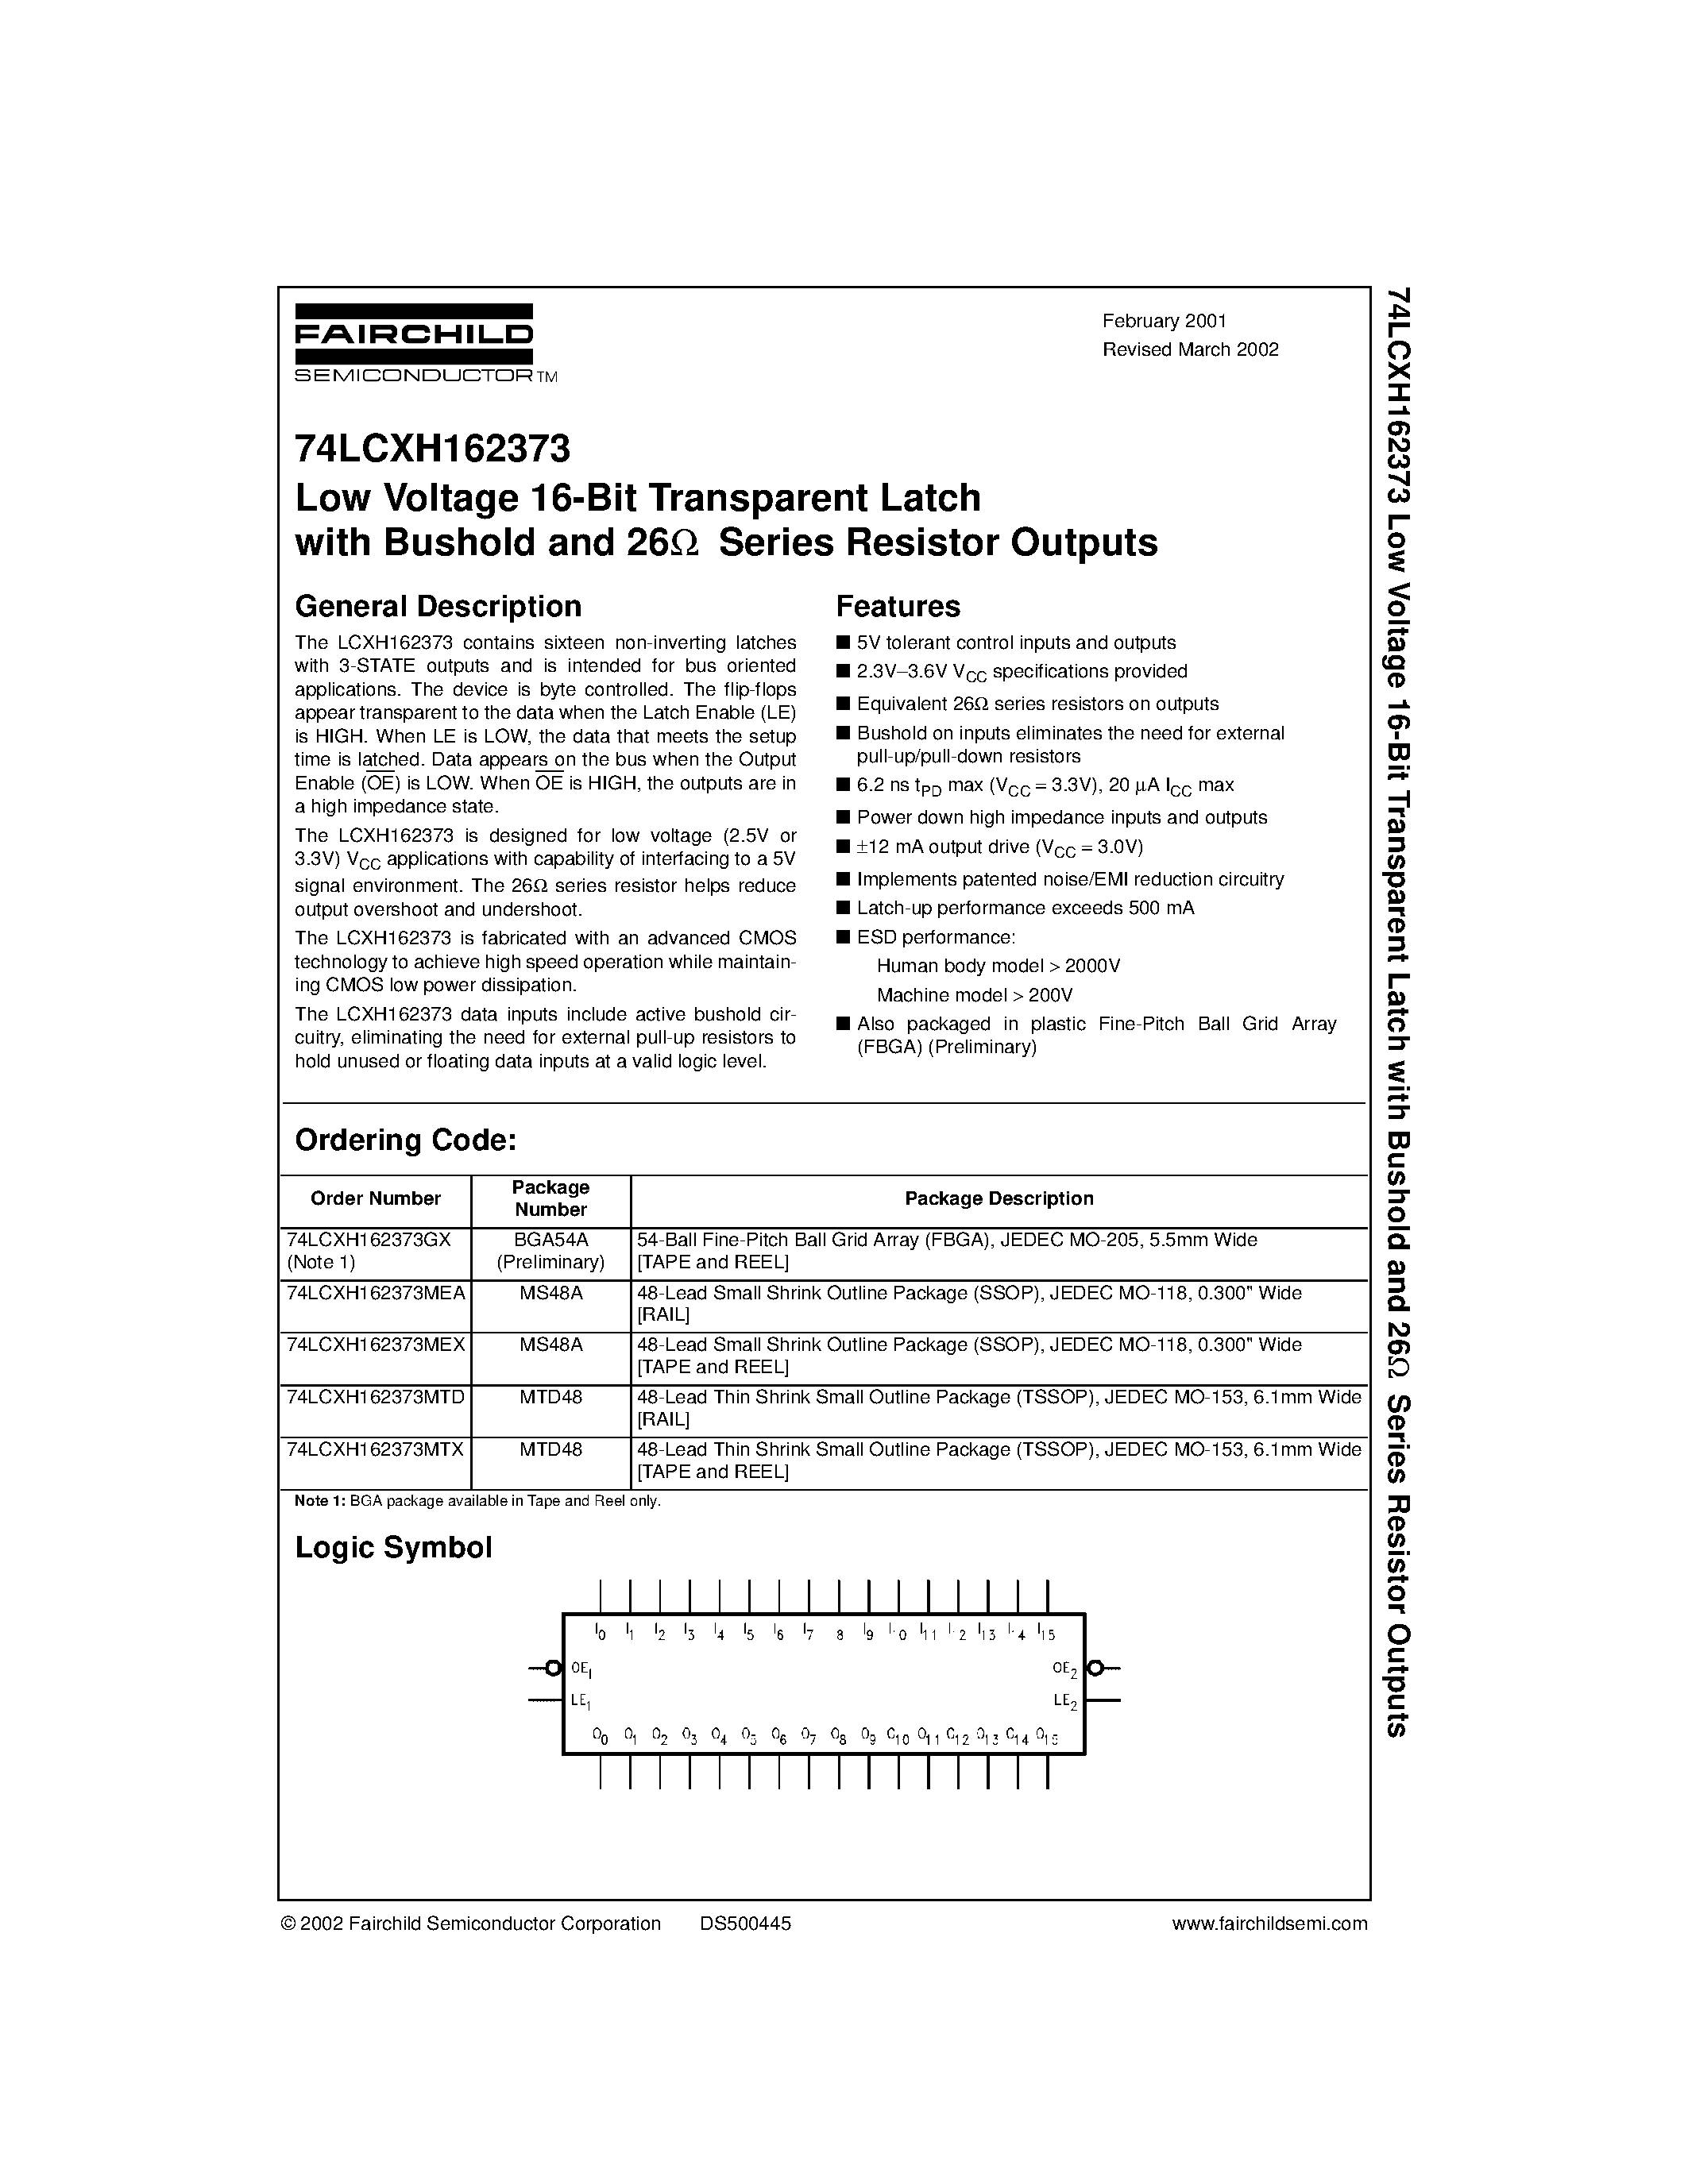 Datasheet 74LCXH162373GX - Low Voltage 16-Bit Transparent Latch with Bushold and 26 Series Resistor Outputs page 1